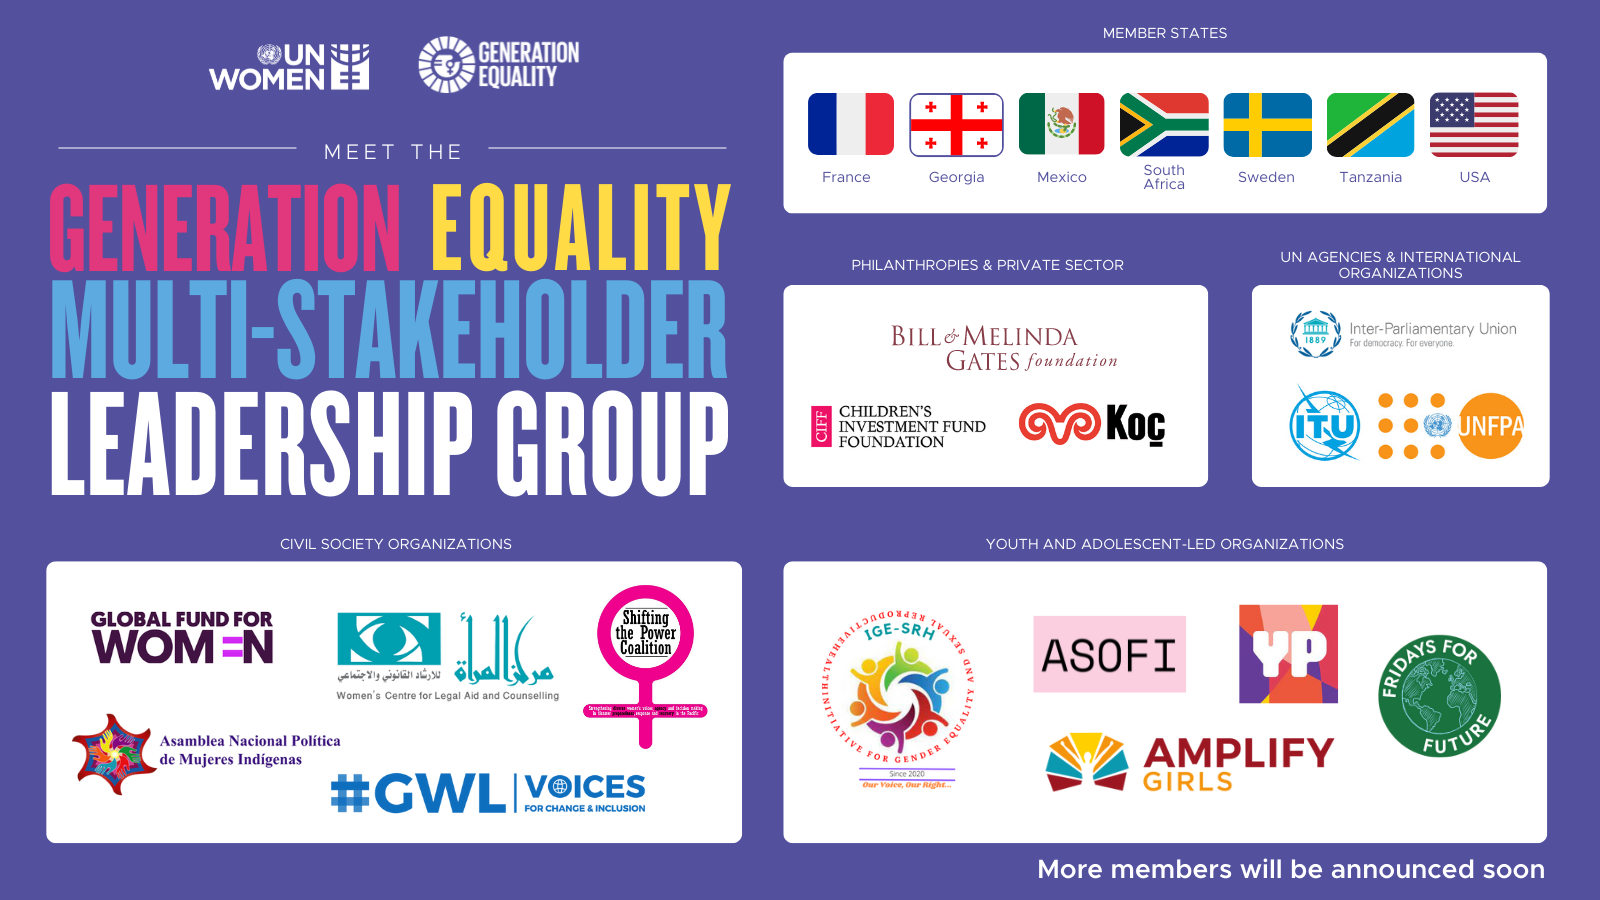 The Generation Equality Multi-Stakeholder Leadership Group was announced during UNGA77